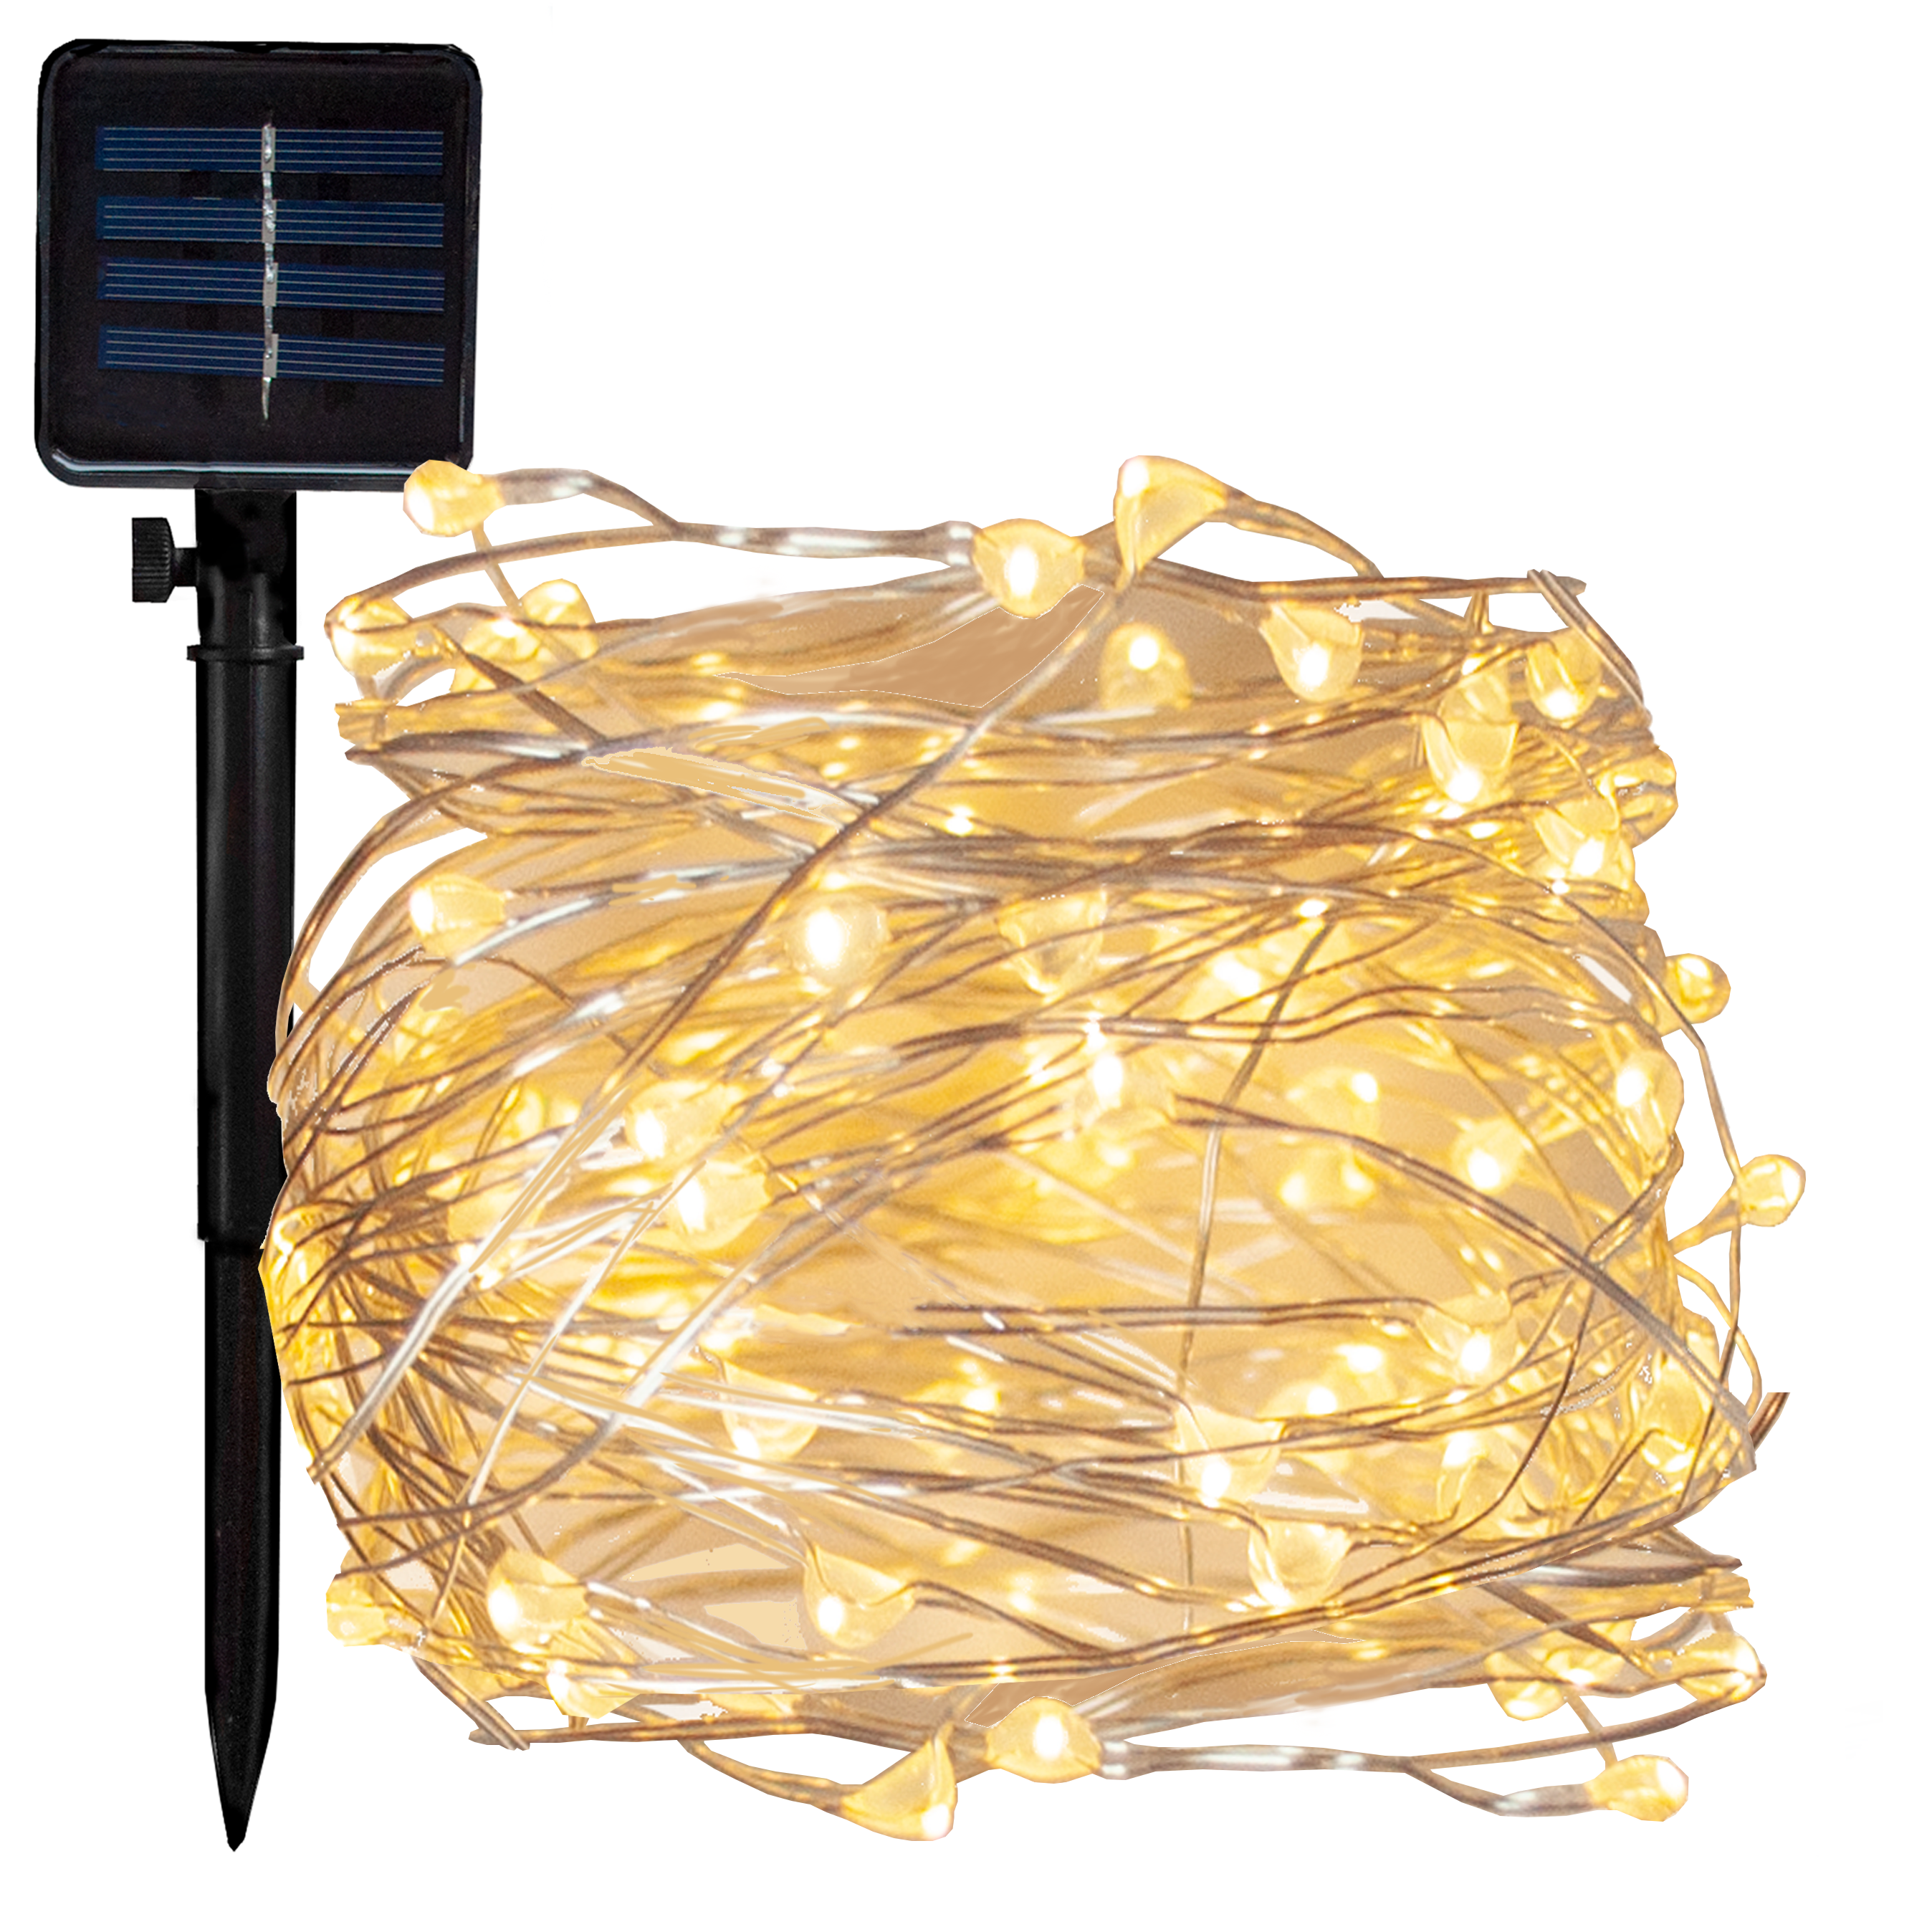 LED Solar Powered Fairy Lights- 16.5 Foot 8 Modes 50 Micro LED Warm White 